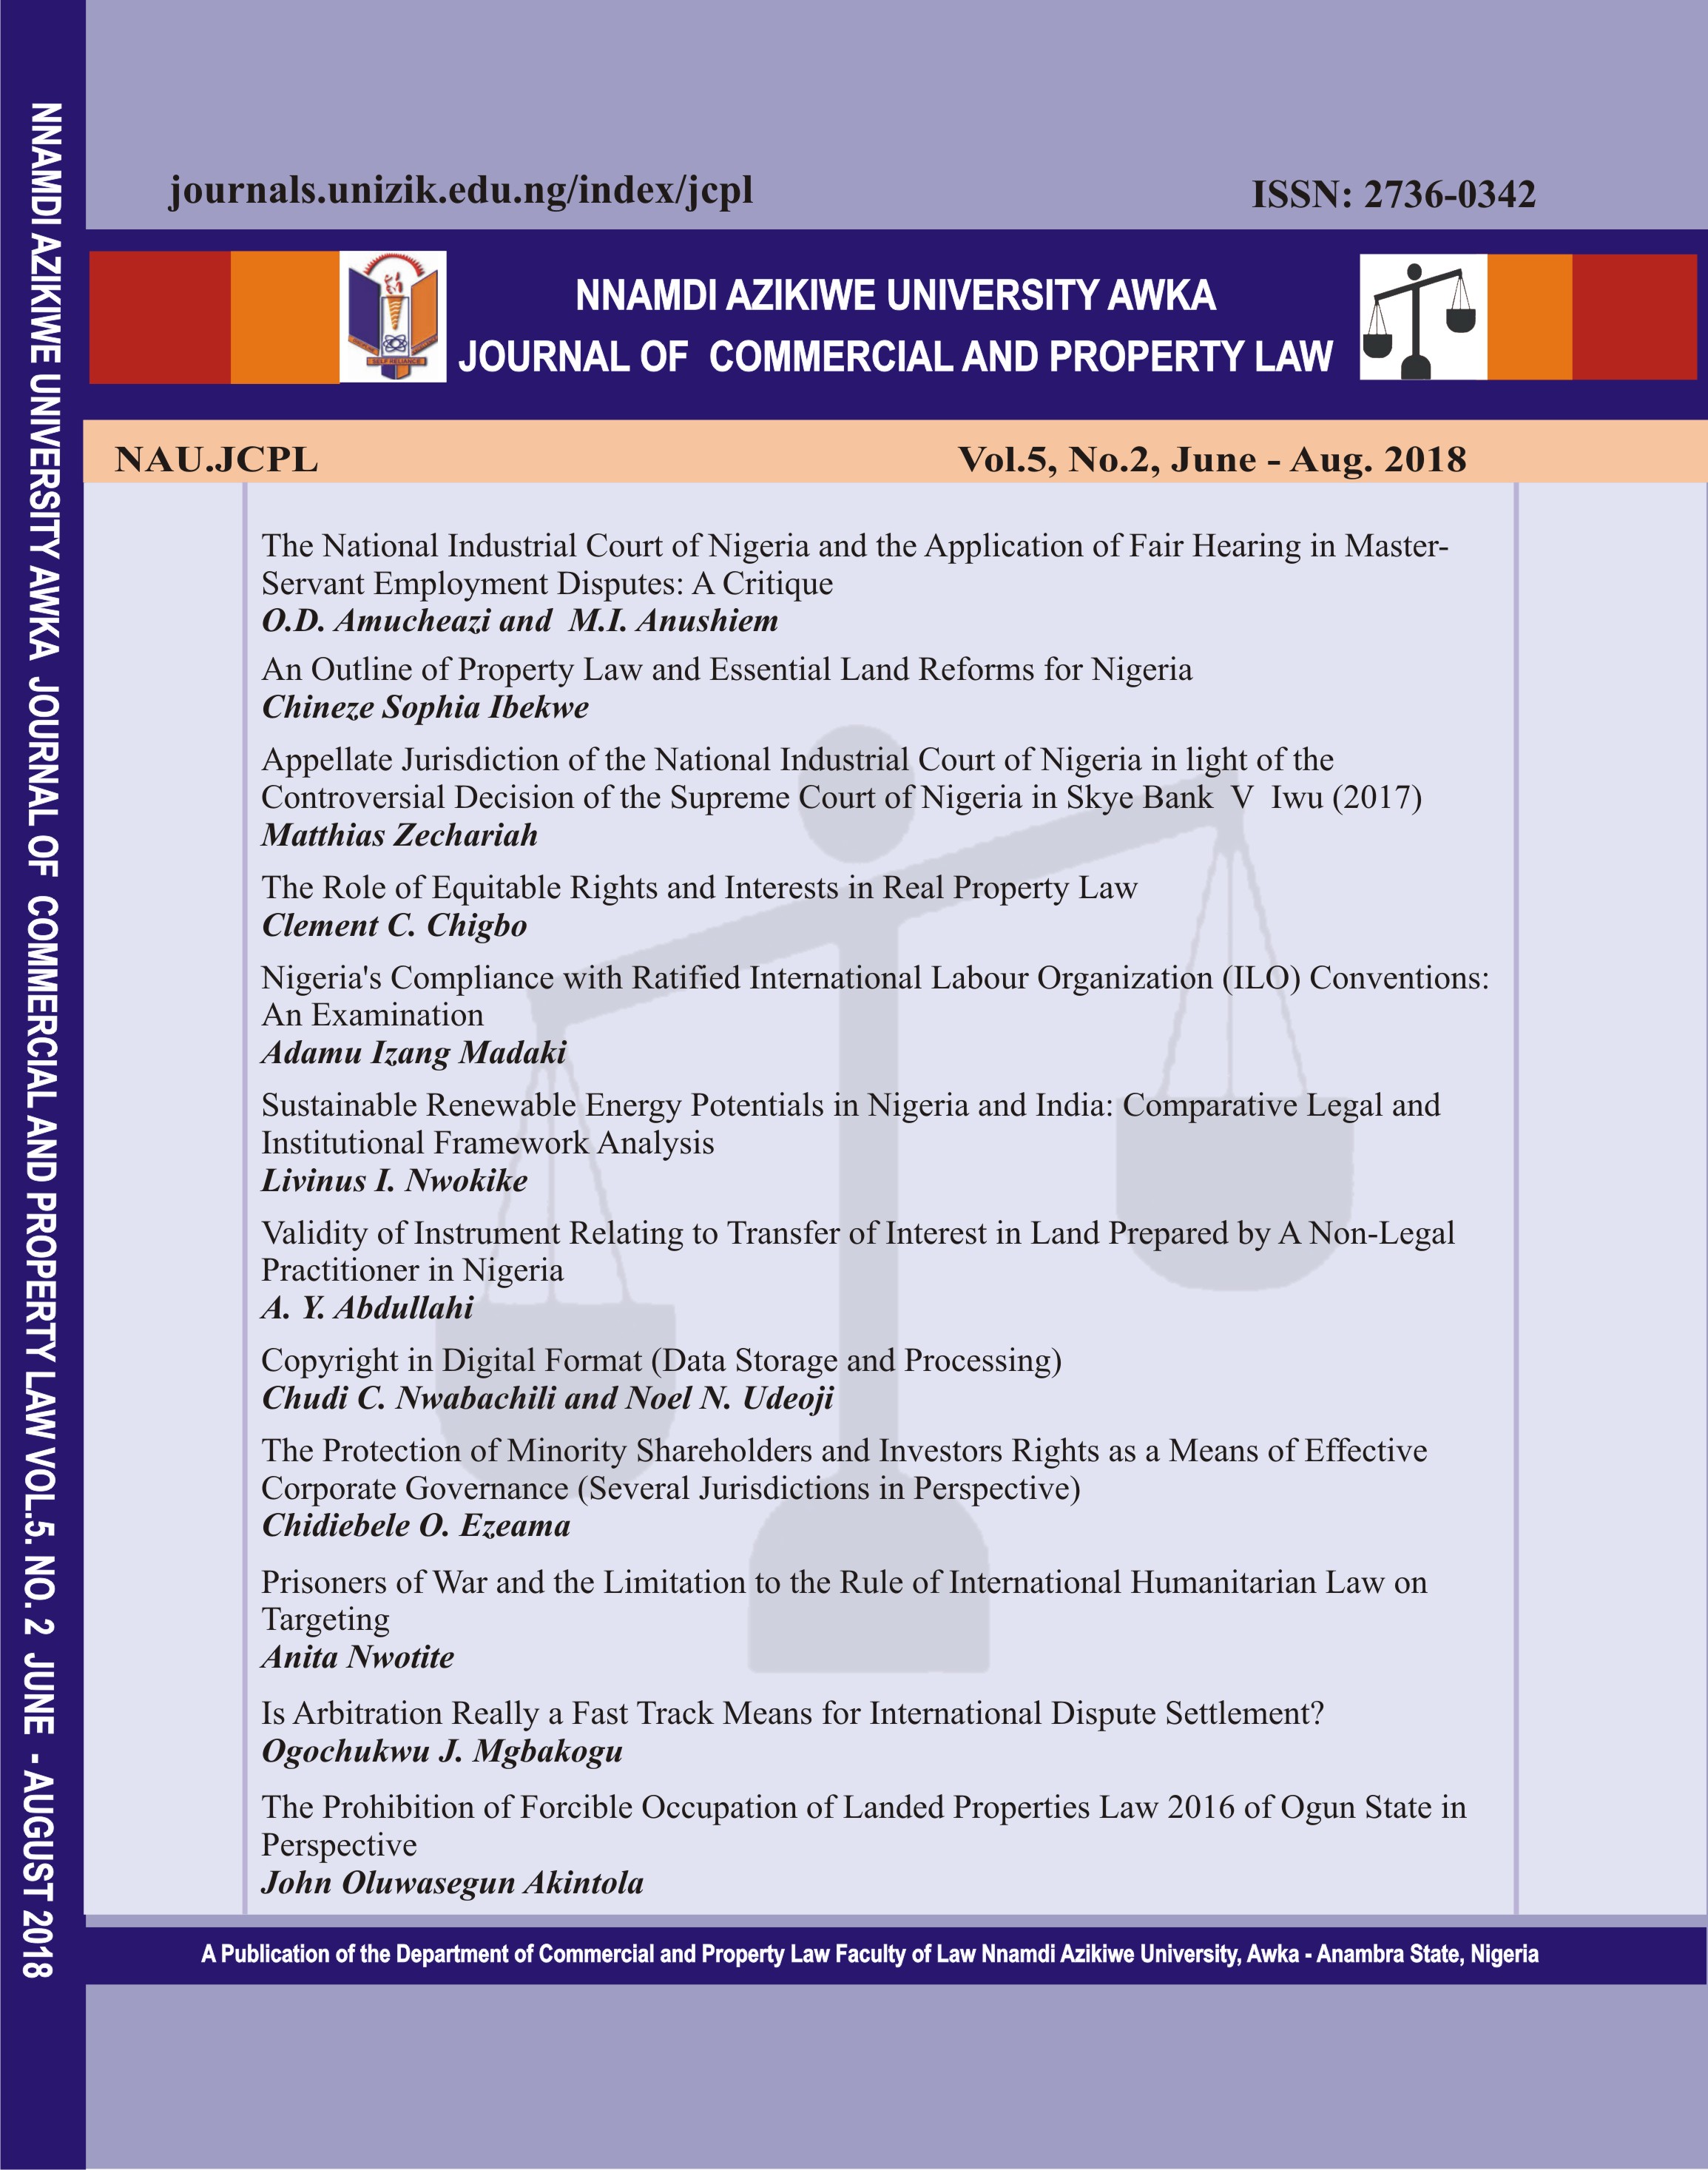 					View Vol. 5 No. 2 (2018): NNAMDI AZIKIWE UNIVERSITY, AWKA JOURNAL OF COMMERCIAL AND PROPERTY LAW
				